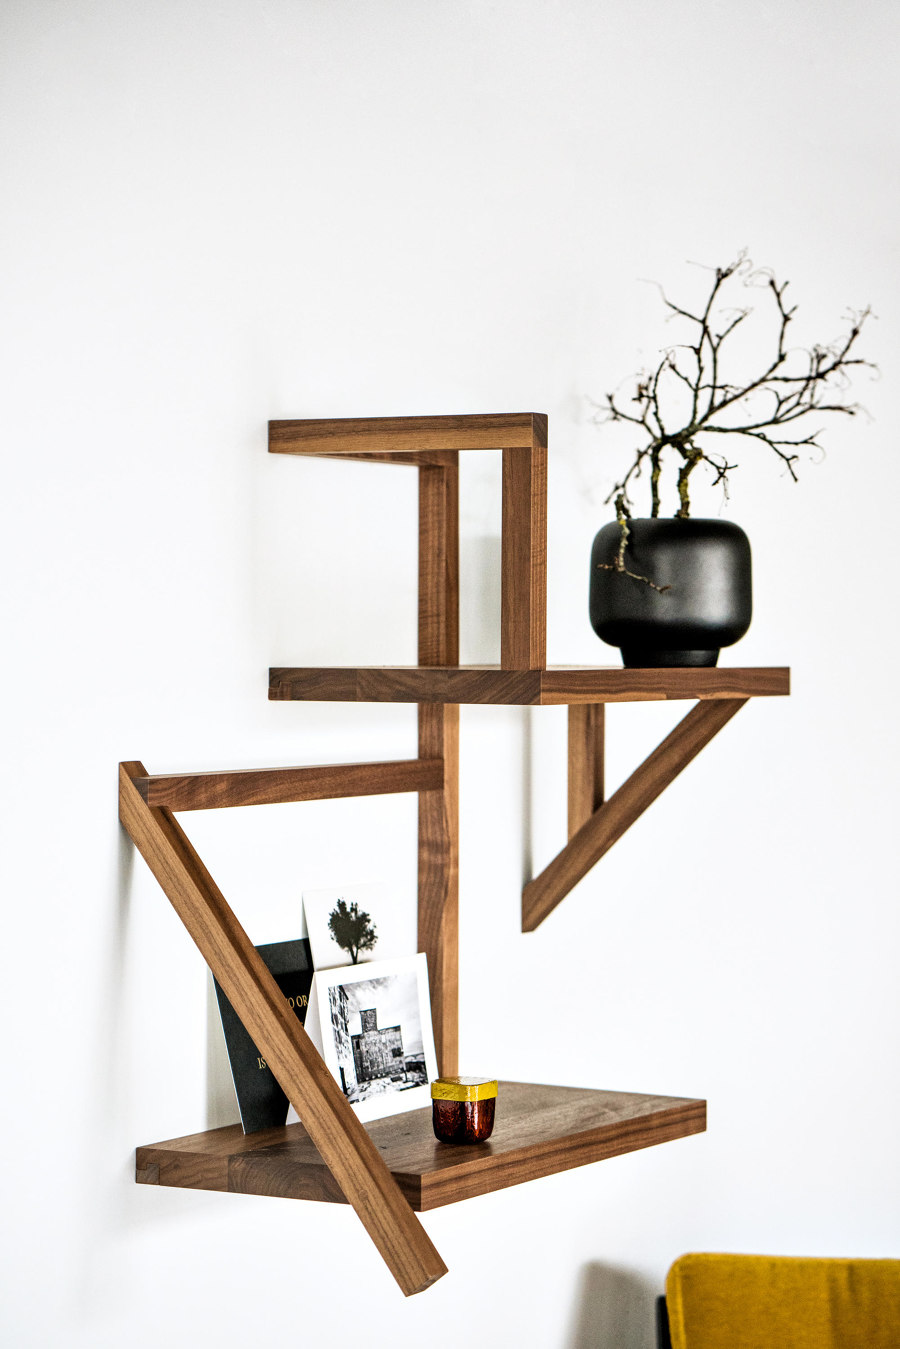 Working with wood – ten examples of solid wood furniture | Novità